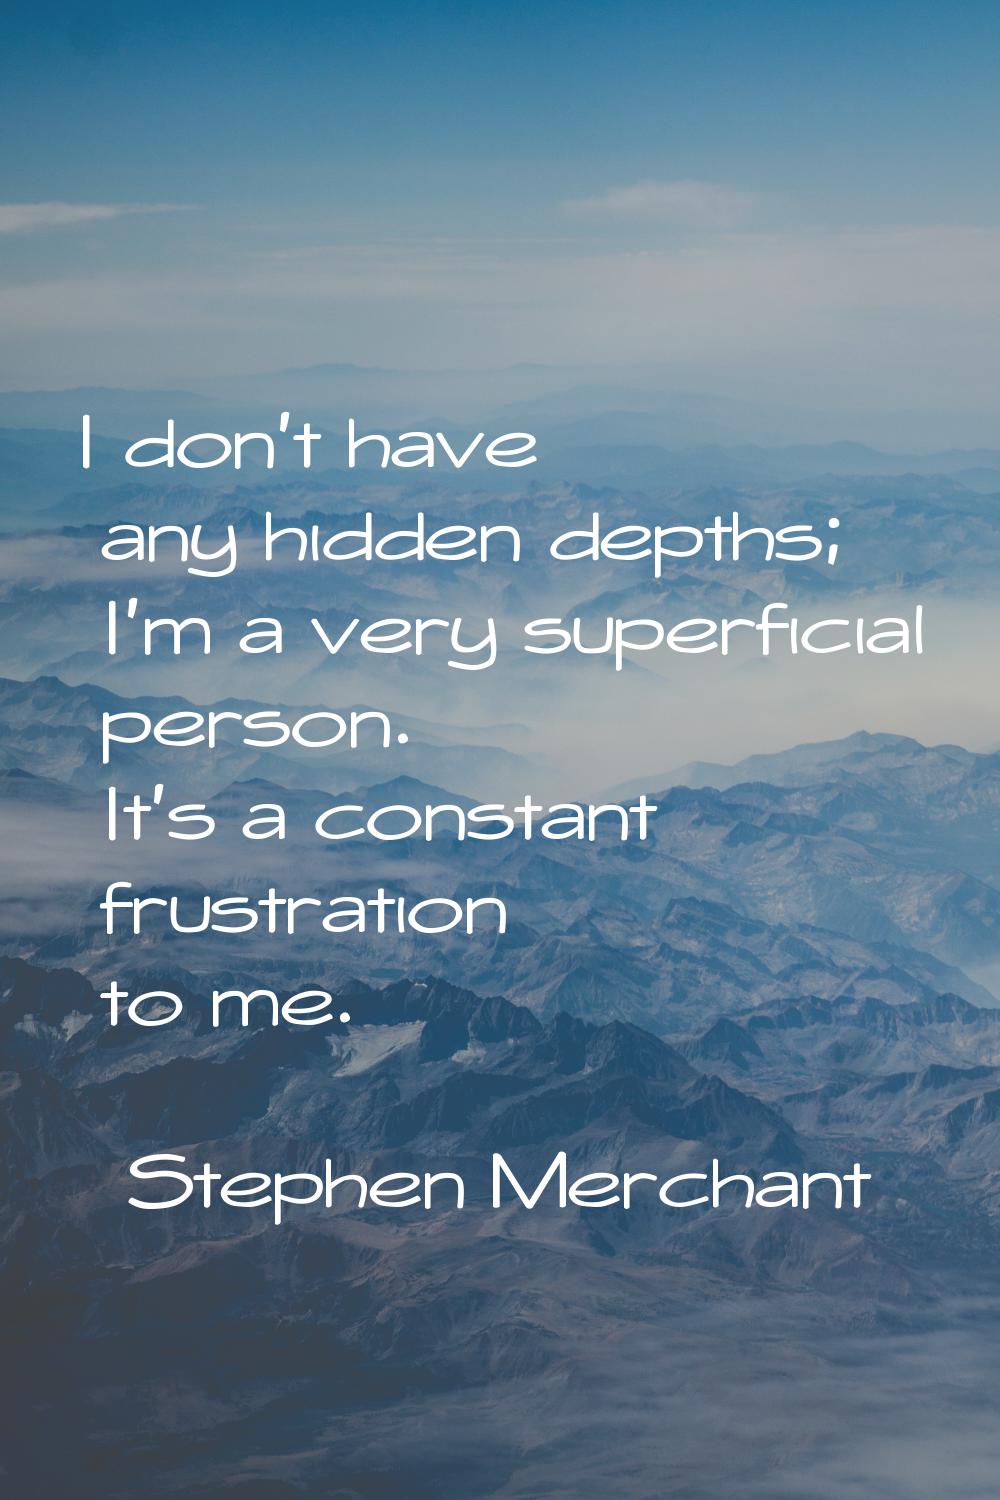 I don't have any hidden depths; I'm a very superficial person. It's a constant frustration to me.